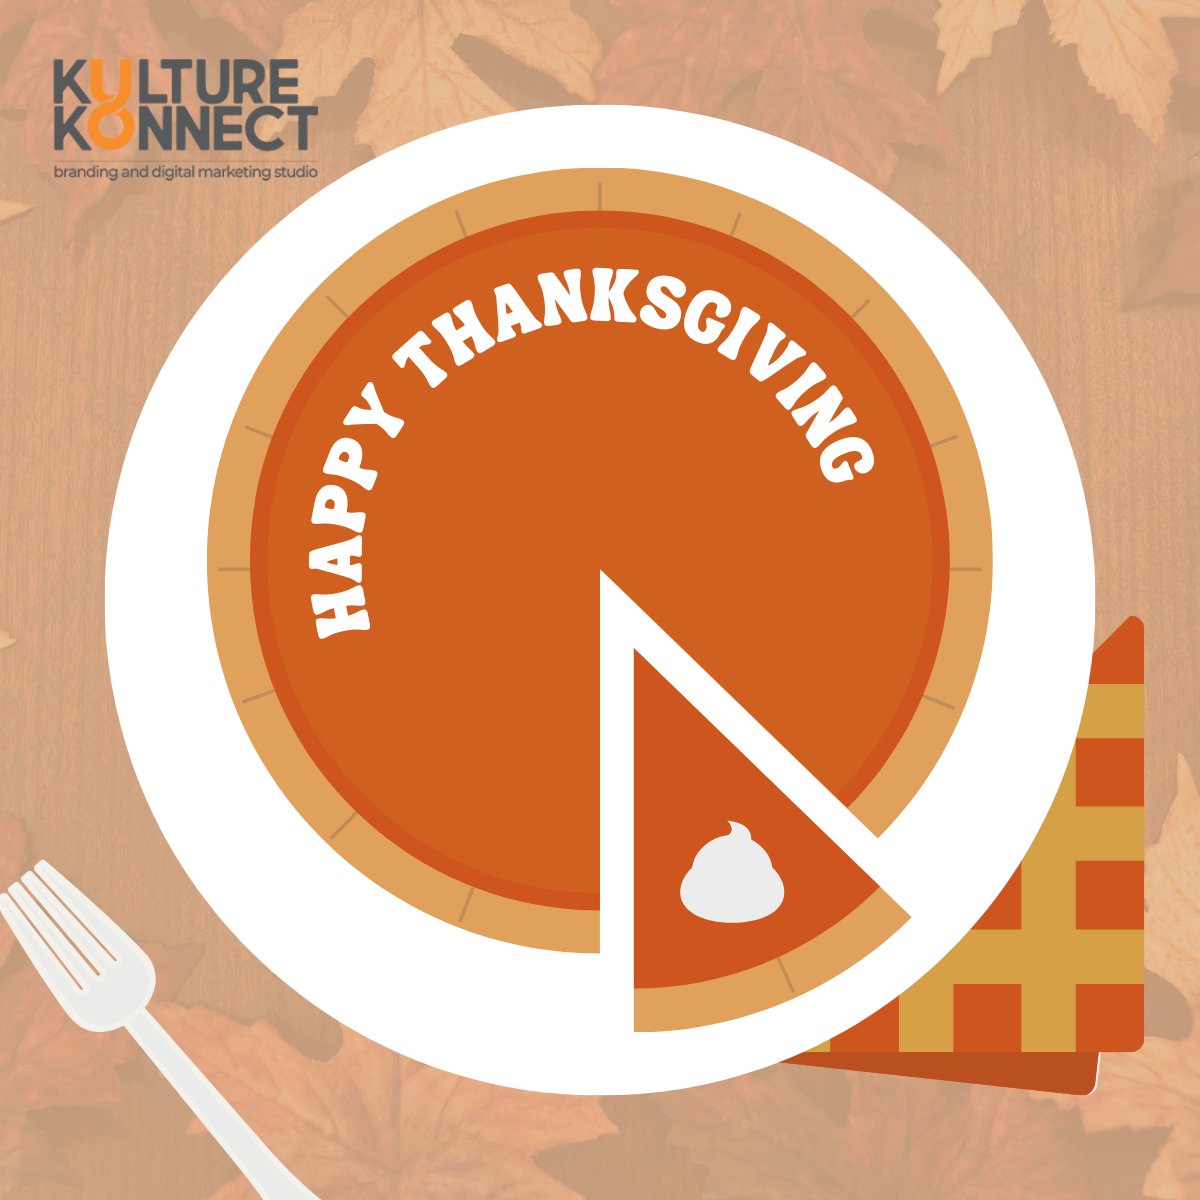 Wishing you a season of sweet success and prosperity! Happy Thanksgiving! #thanksgiving #happythanksgiving #kulturekonnect